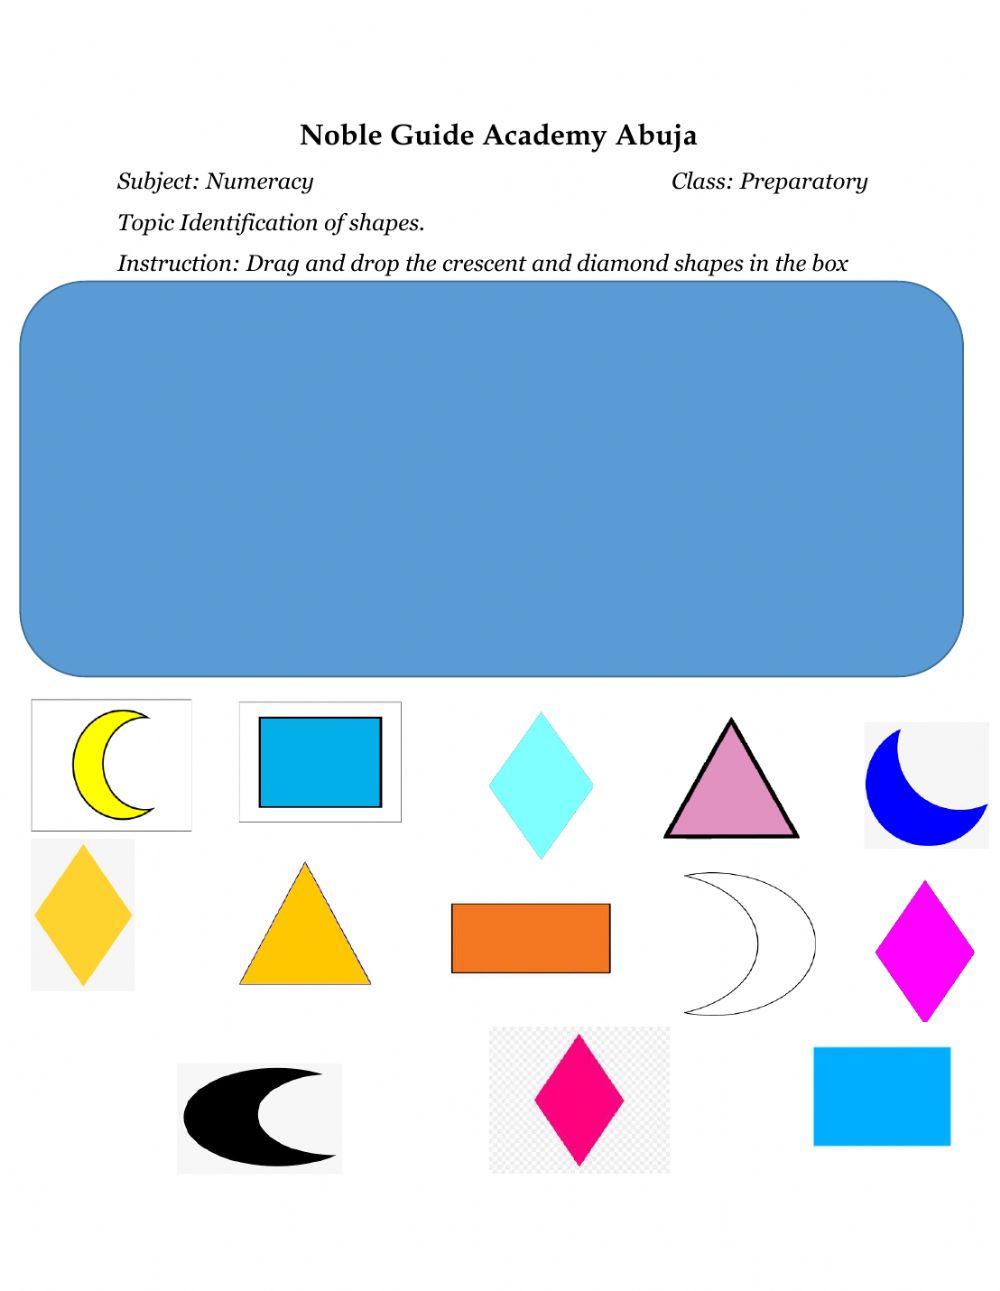 Identification of Shapes